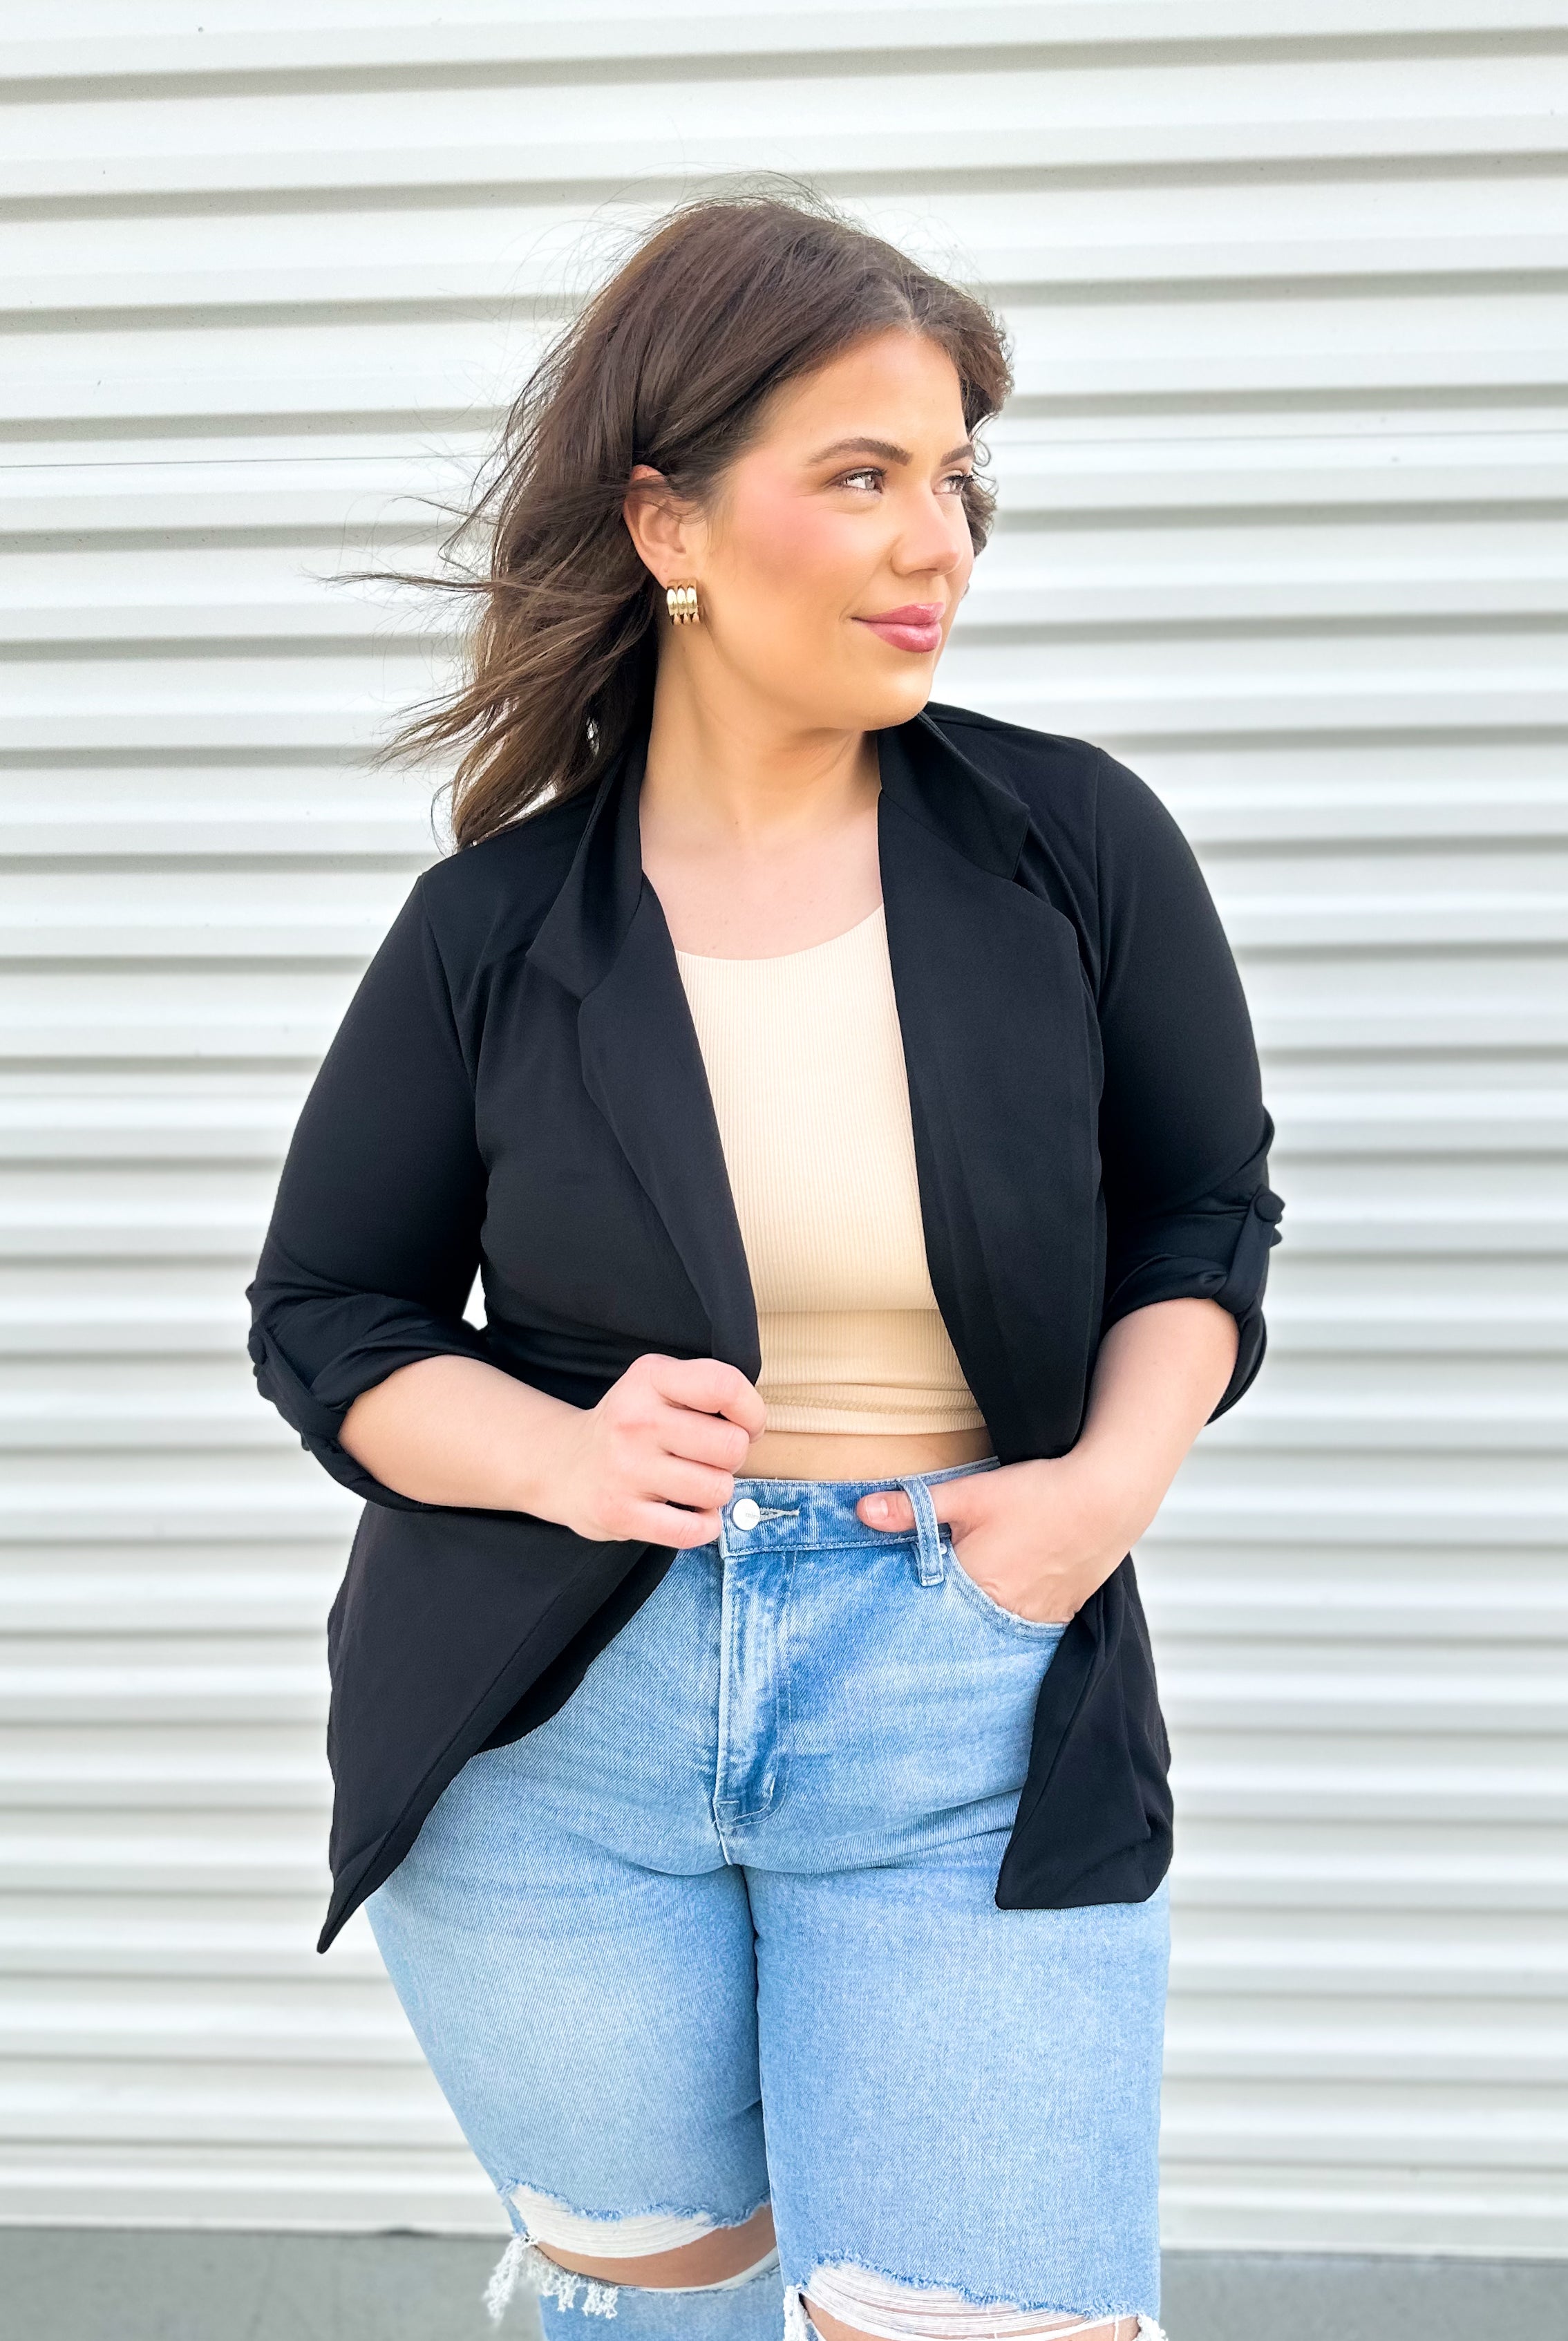 RESTOCK : Upgrade the Look Blazer-200 Jackets/Shackets-Andree by Unit-Heathered Boho Boutique, Women's Fashion and Accessories in Palmetto, FL